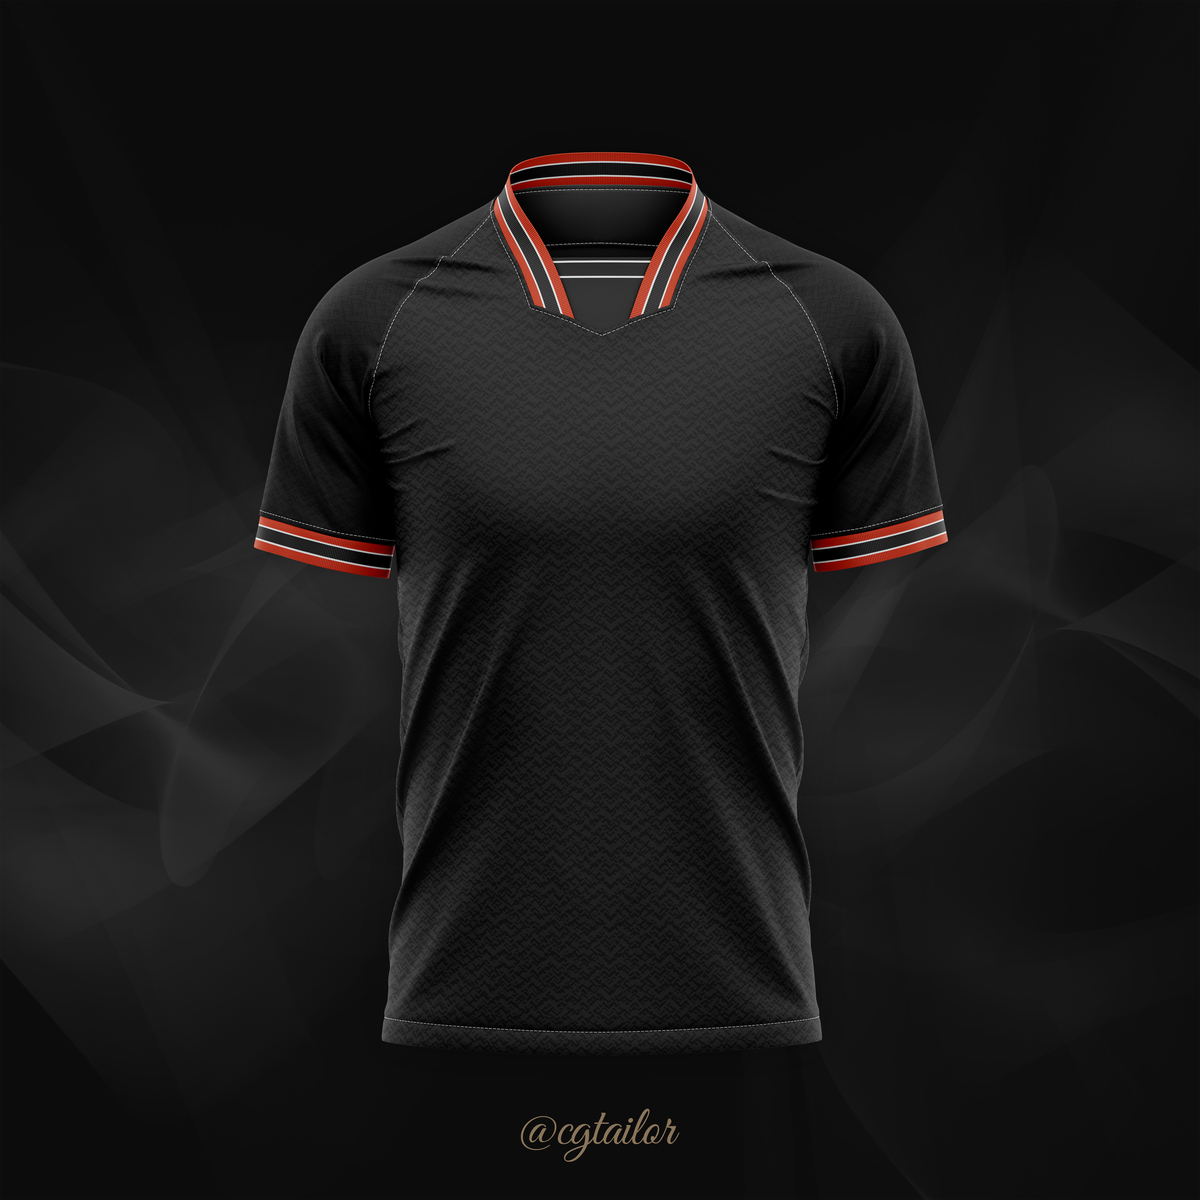 Download Nike Soccer Jersey Mockup By Cg Tailor On Dribbble